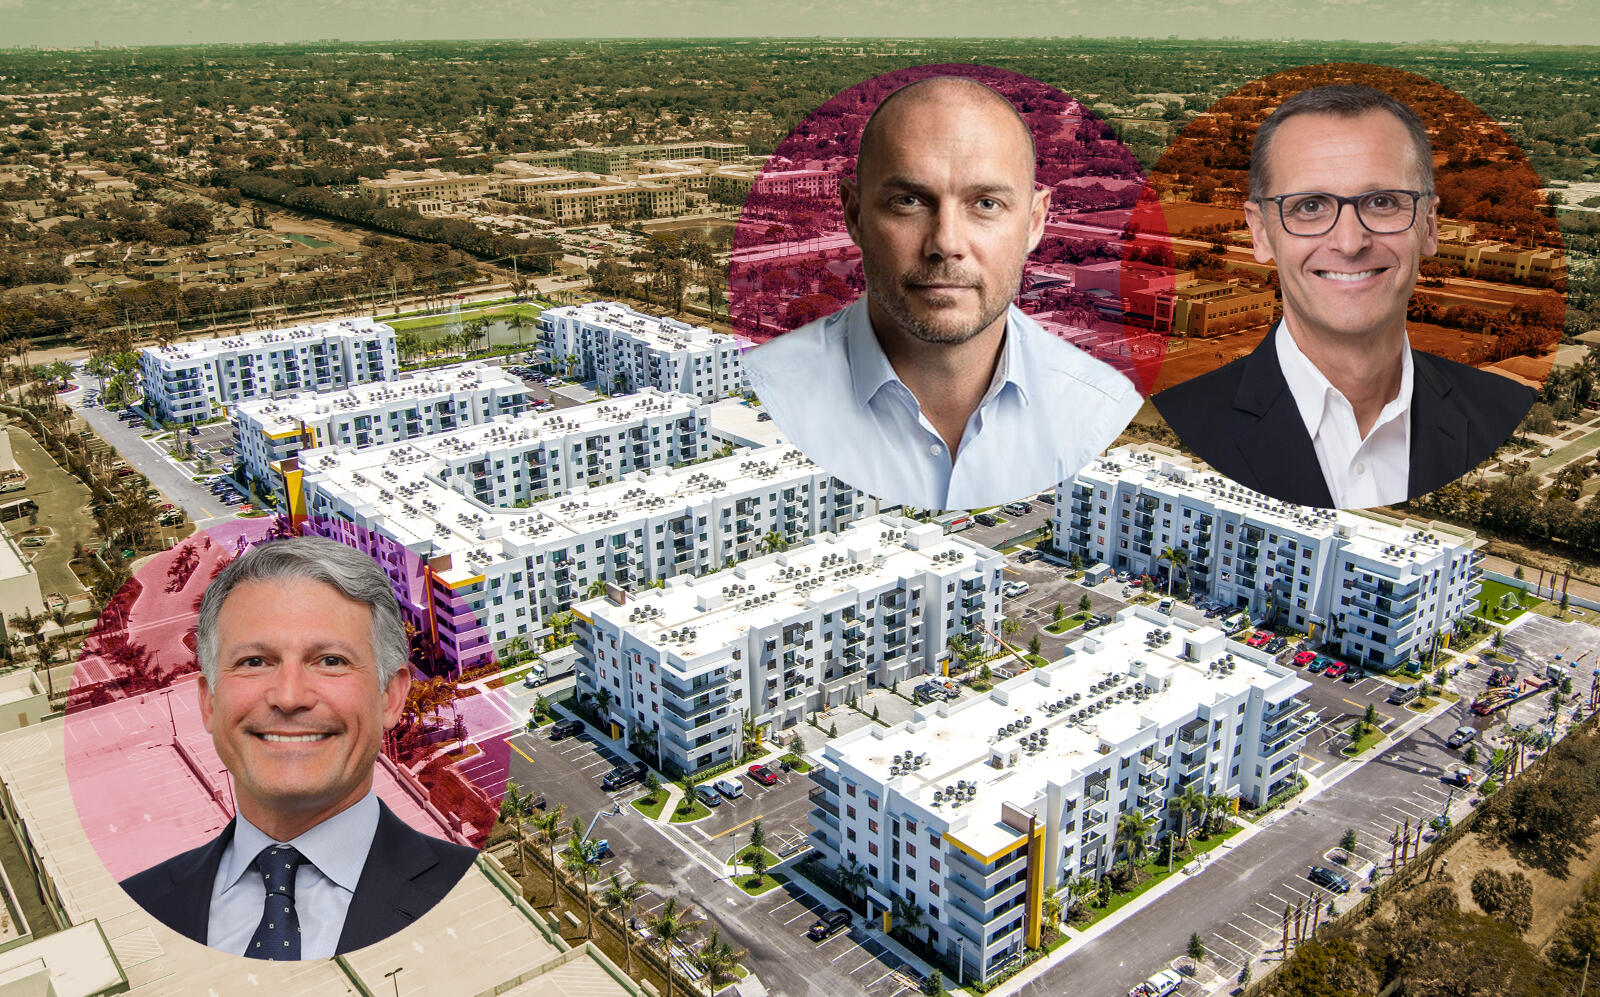 The Residences at Uptown Boca with Cortland CEO Steven DeFrancis and the sellers Alexander Rosemurgy and Rick Giles